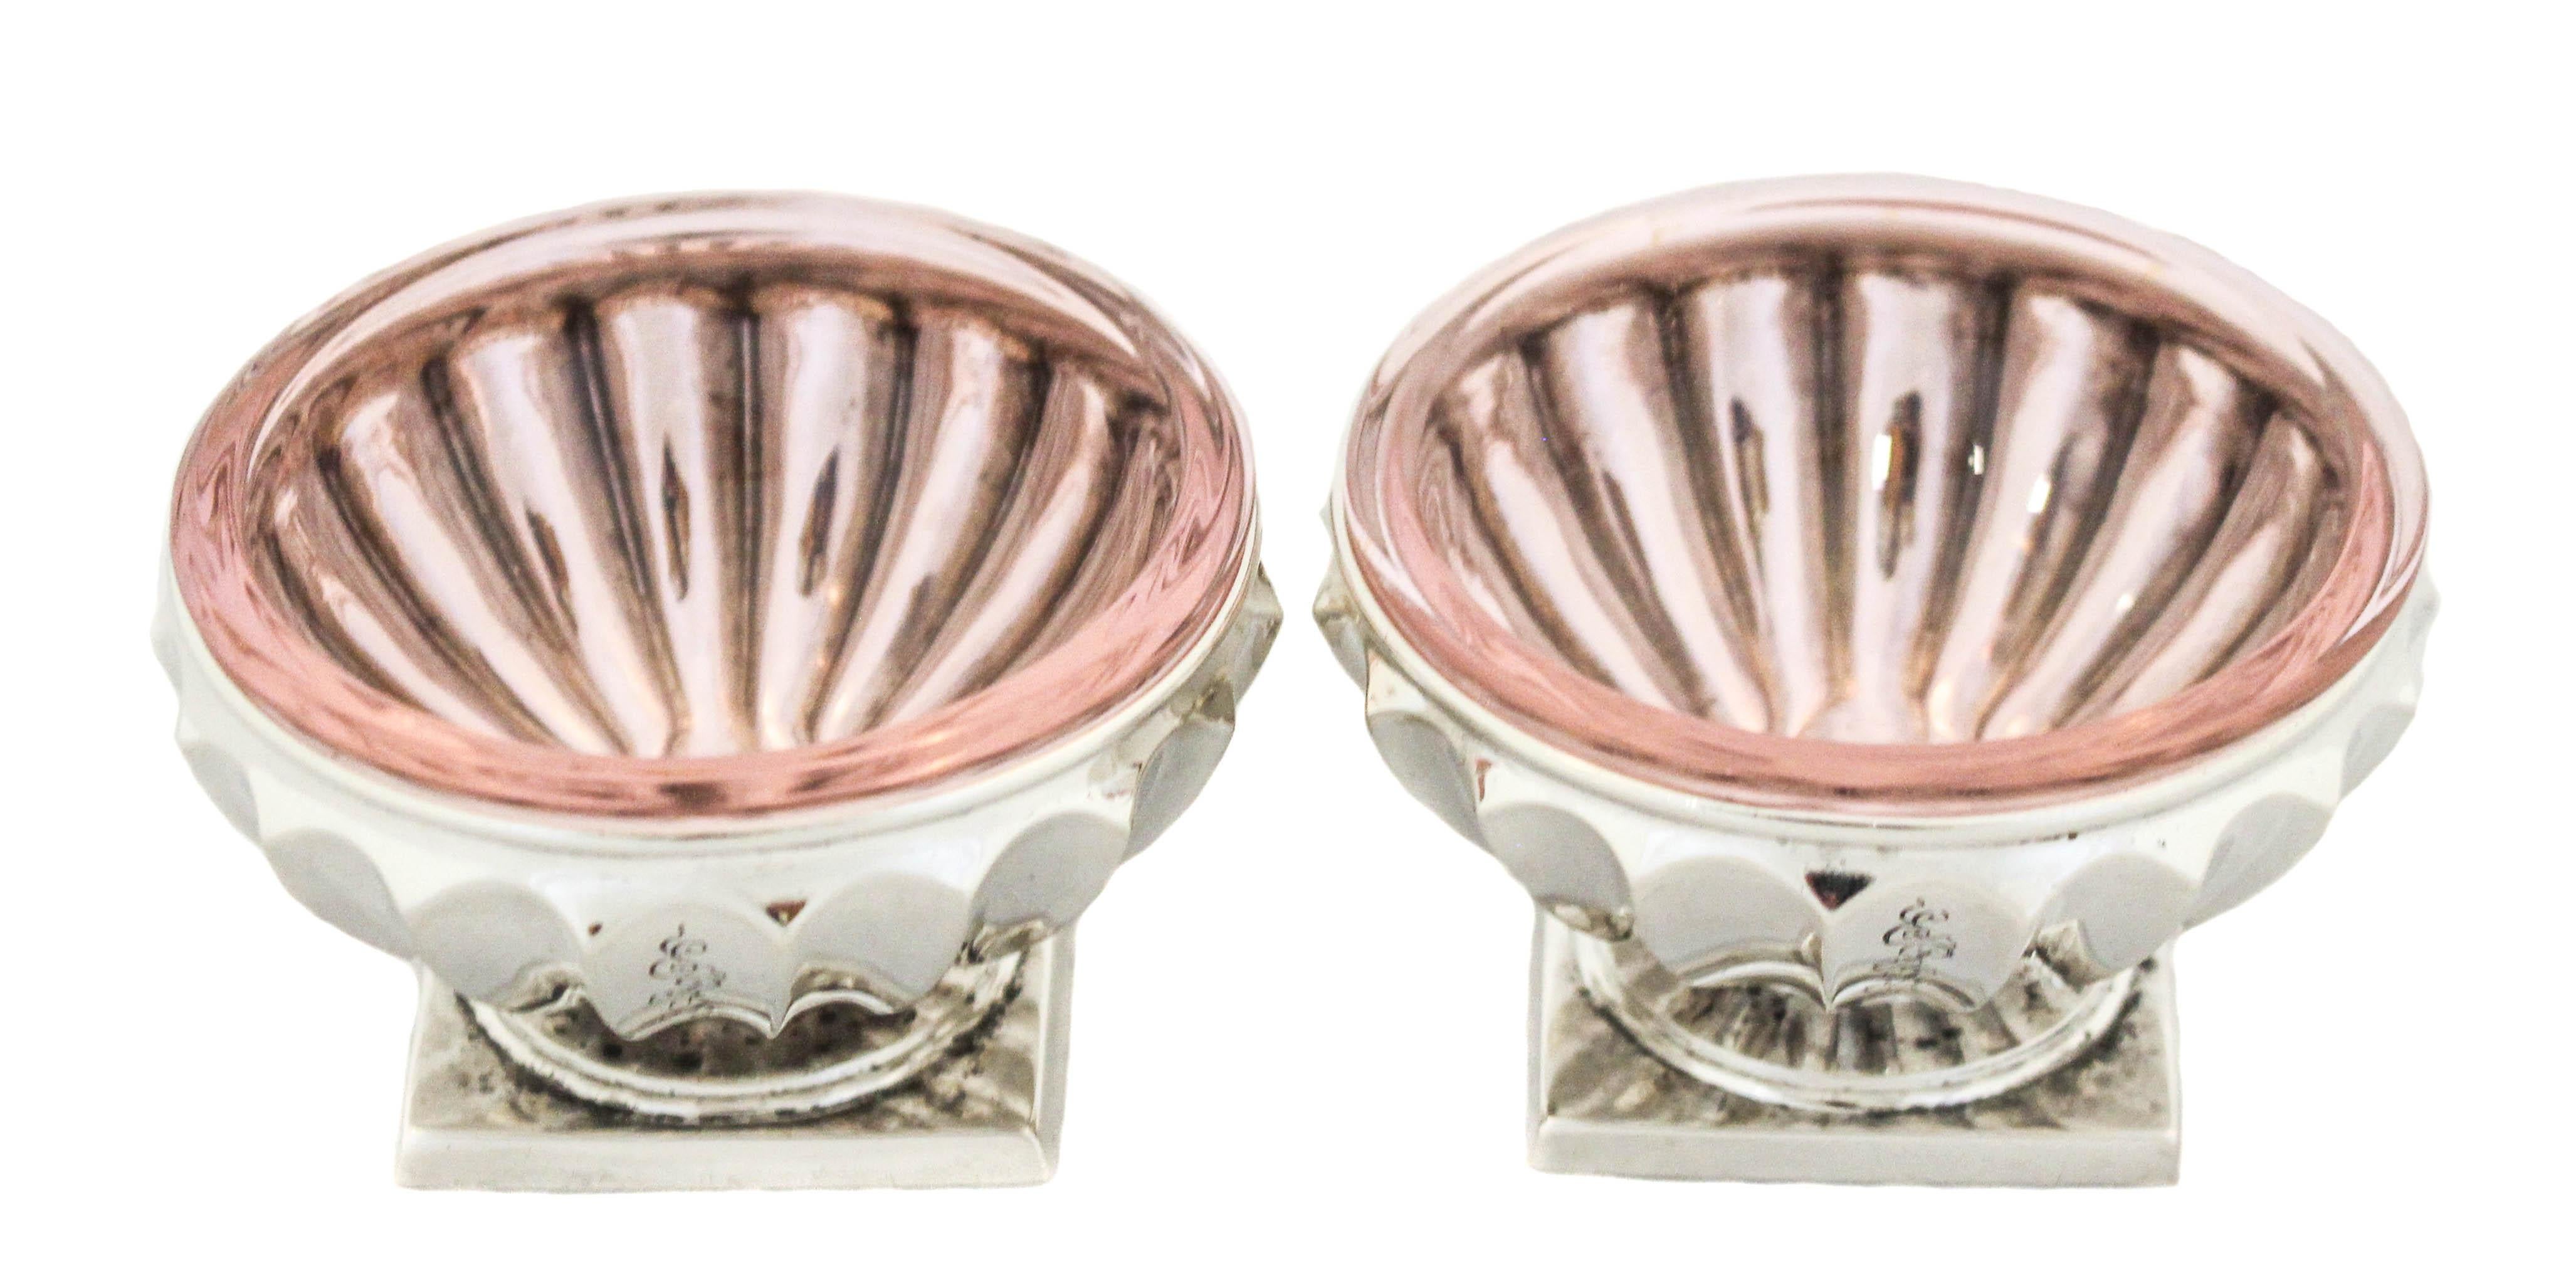 Being offered is a pair of sterling silver salt cellars by the world renowned Tiffany & Company. They have a square shaped base with a ribbed body. They each have a light purple glass liner that fits in perfectly to protect the silver from the salt.